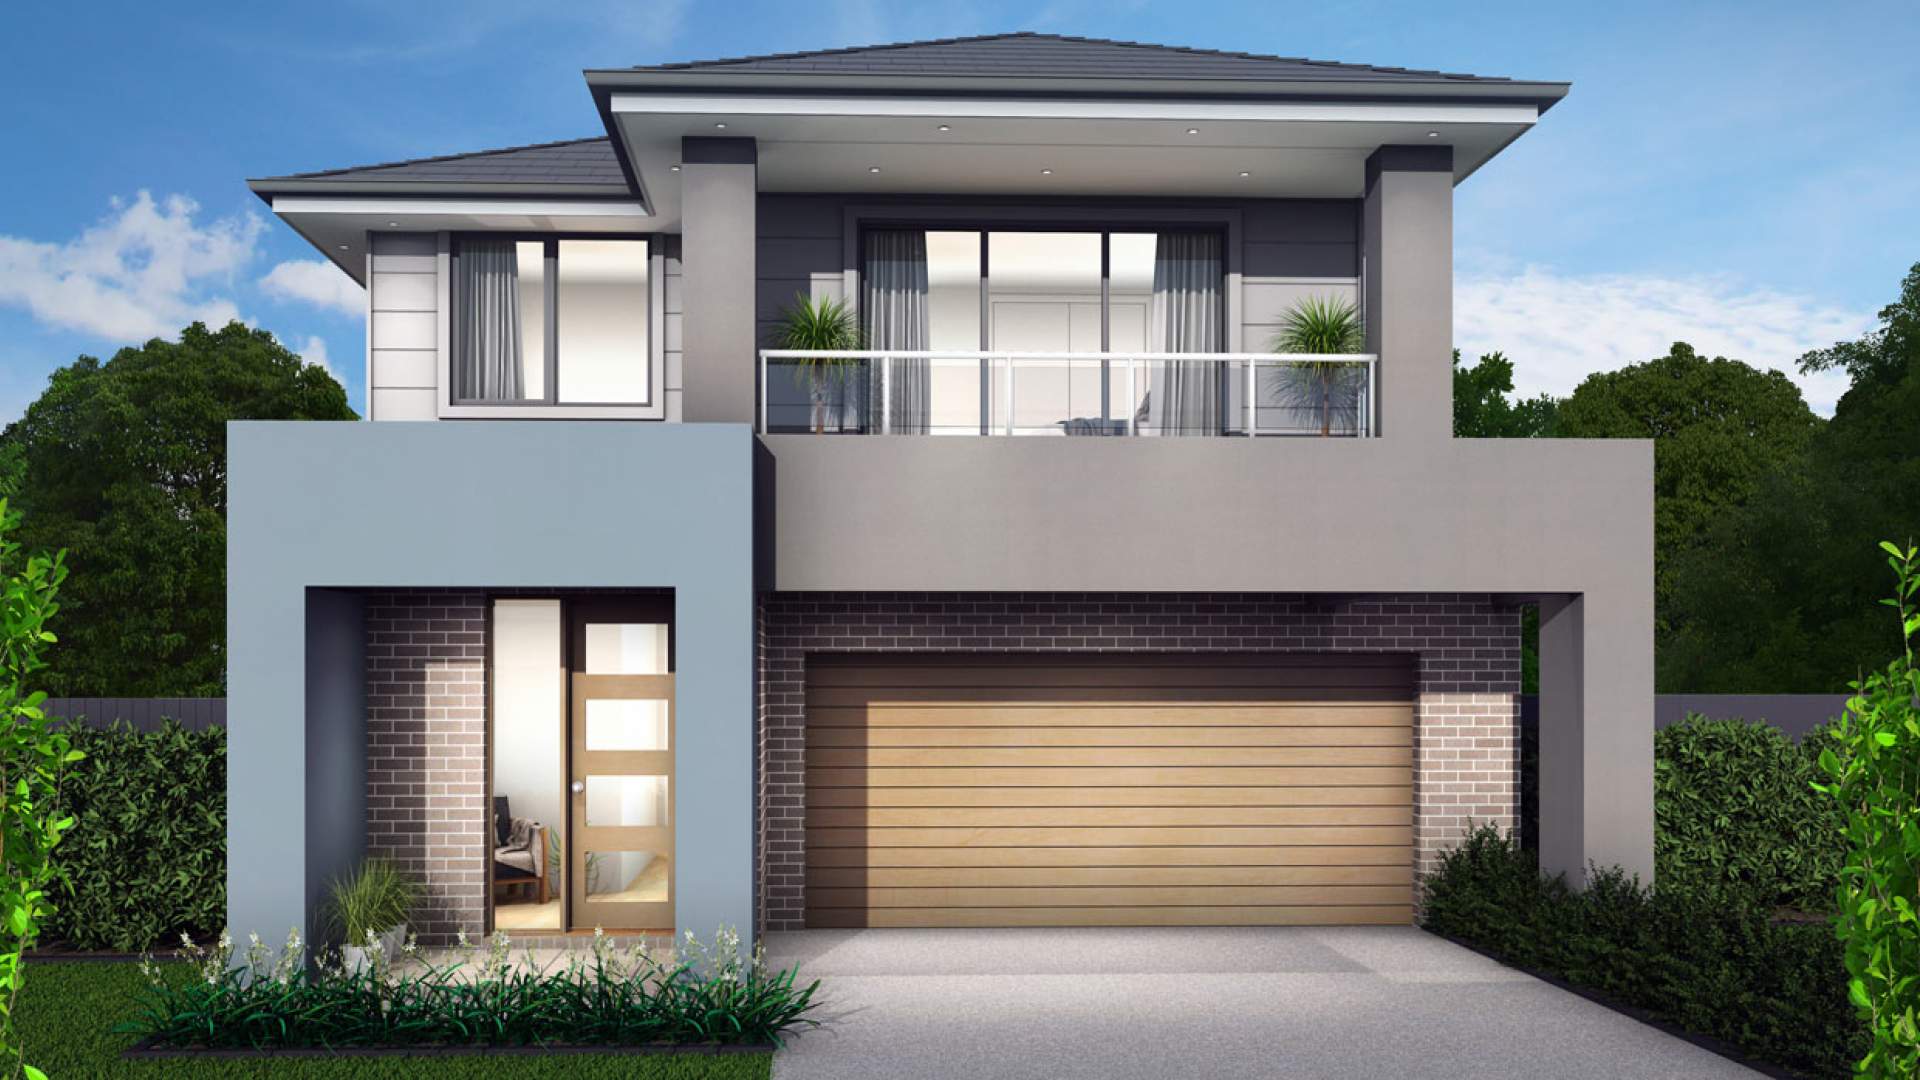 Applause Narrow Block House Design with 4 Bedrooms